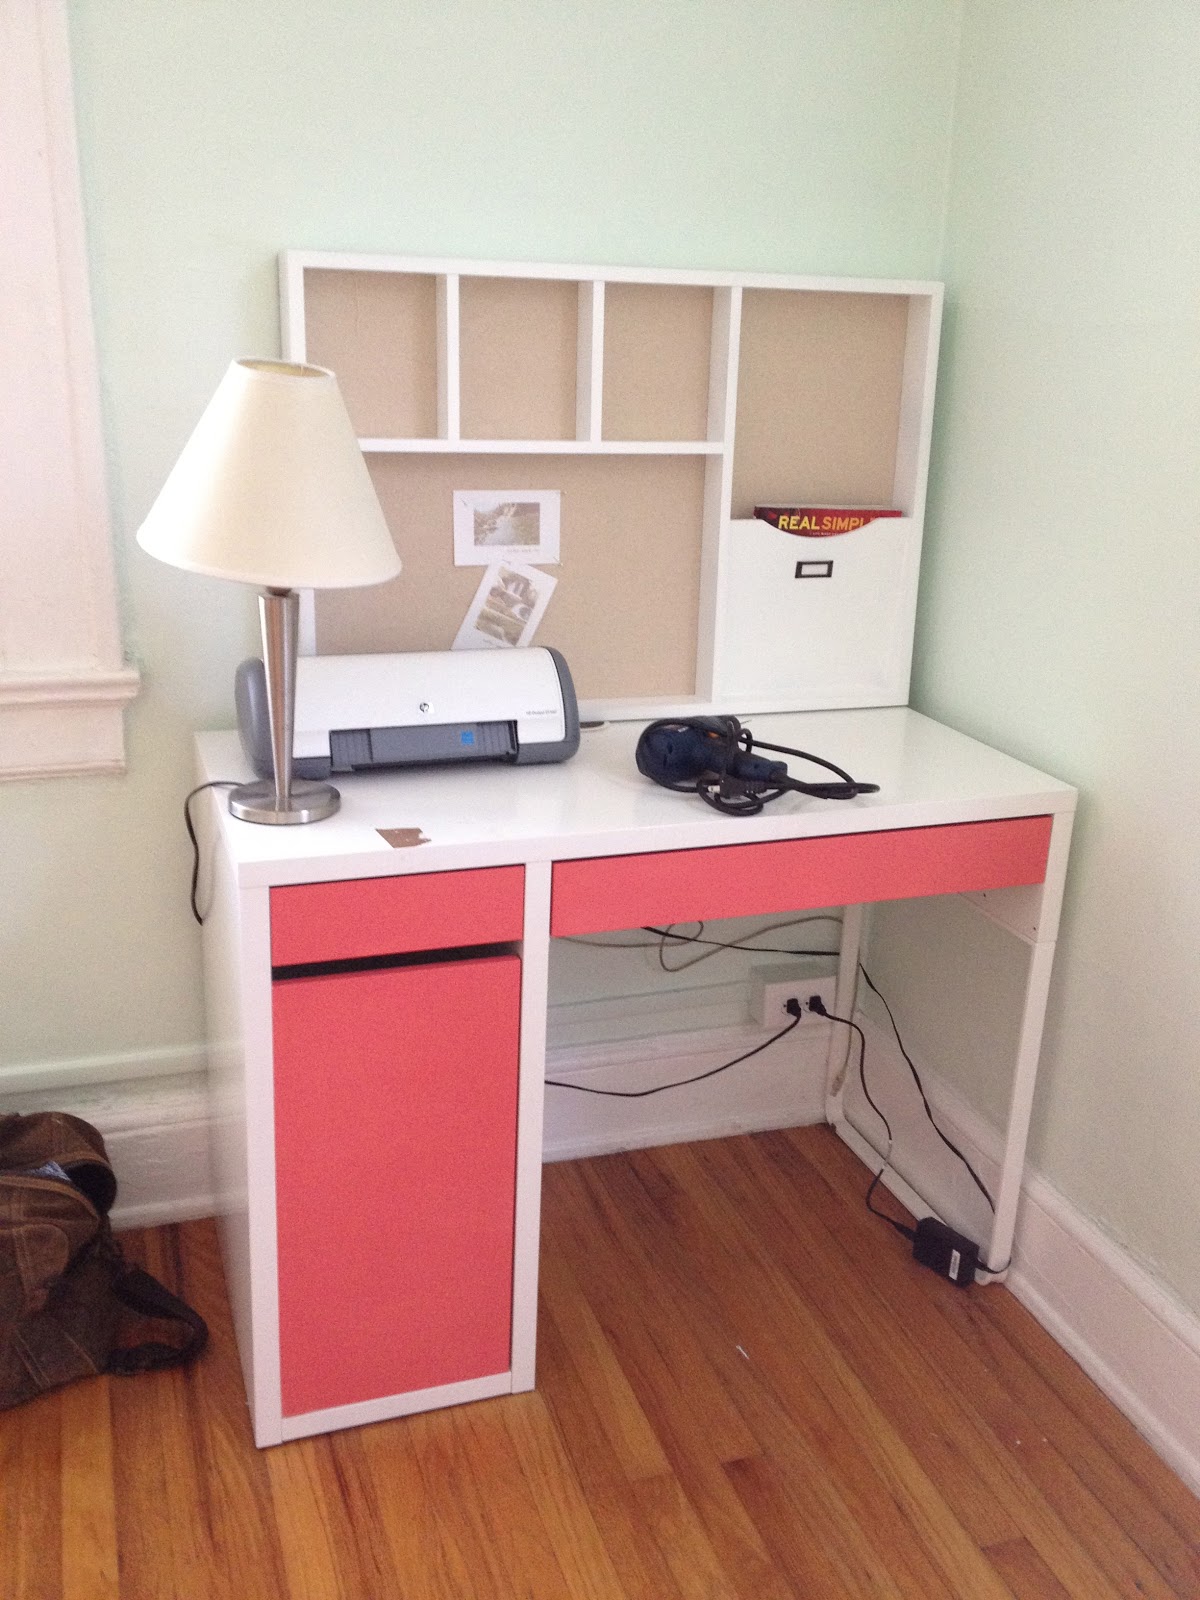 650 Square Feet Ikea Micke Desk Revamp,How To Make Crepes From Scratch